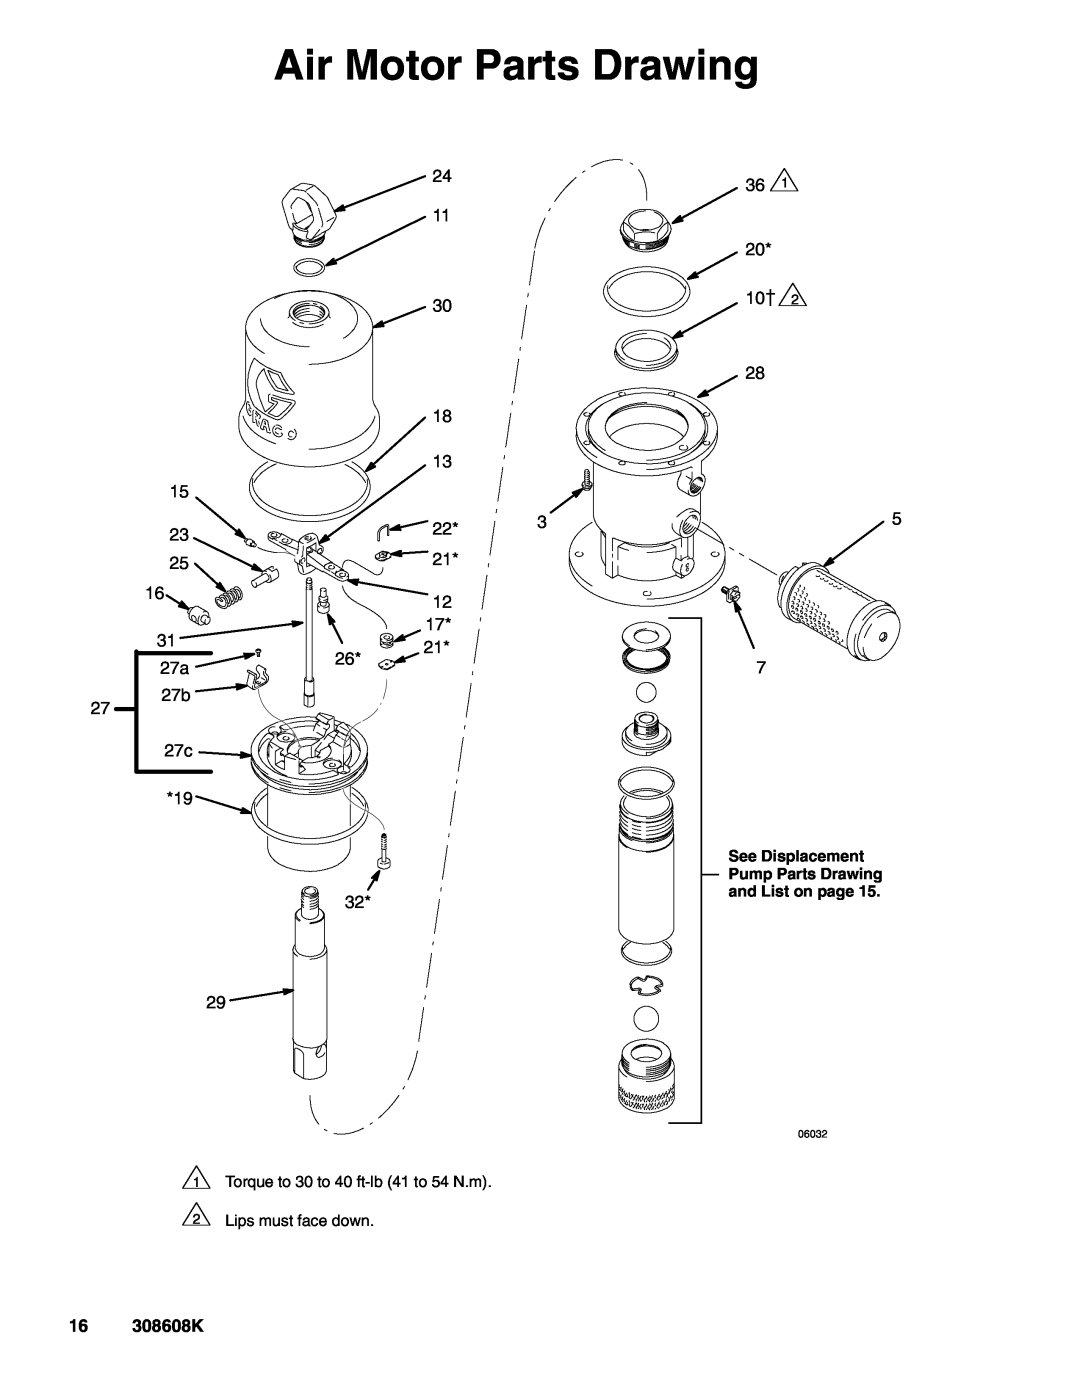 Graco Series D, 238108 important safety instructions Air Motor Parts Drawing, 16 308608K, 06032 